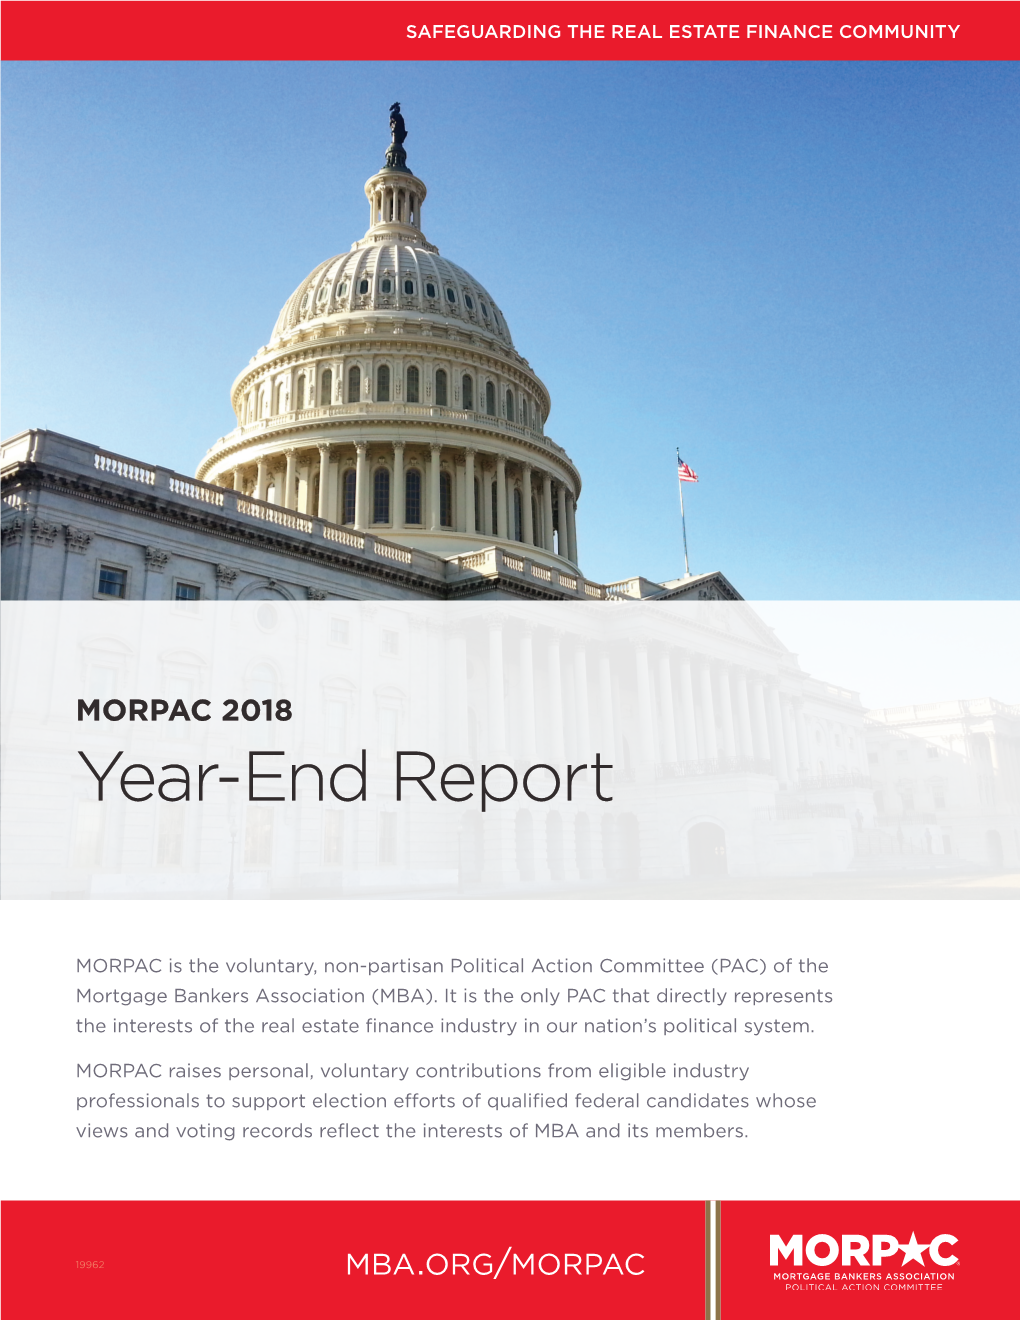 MORPAC 2018 Year-End Report